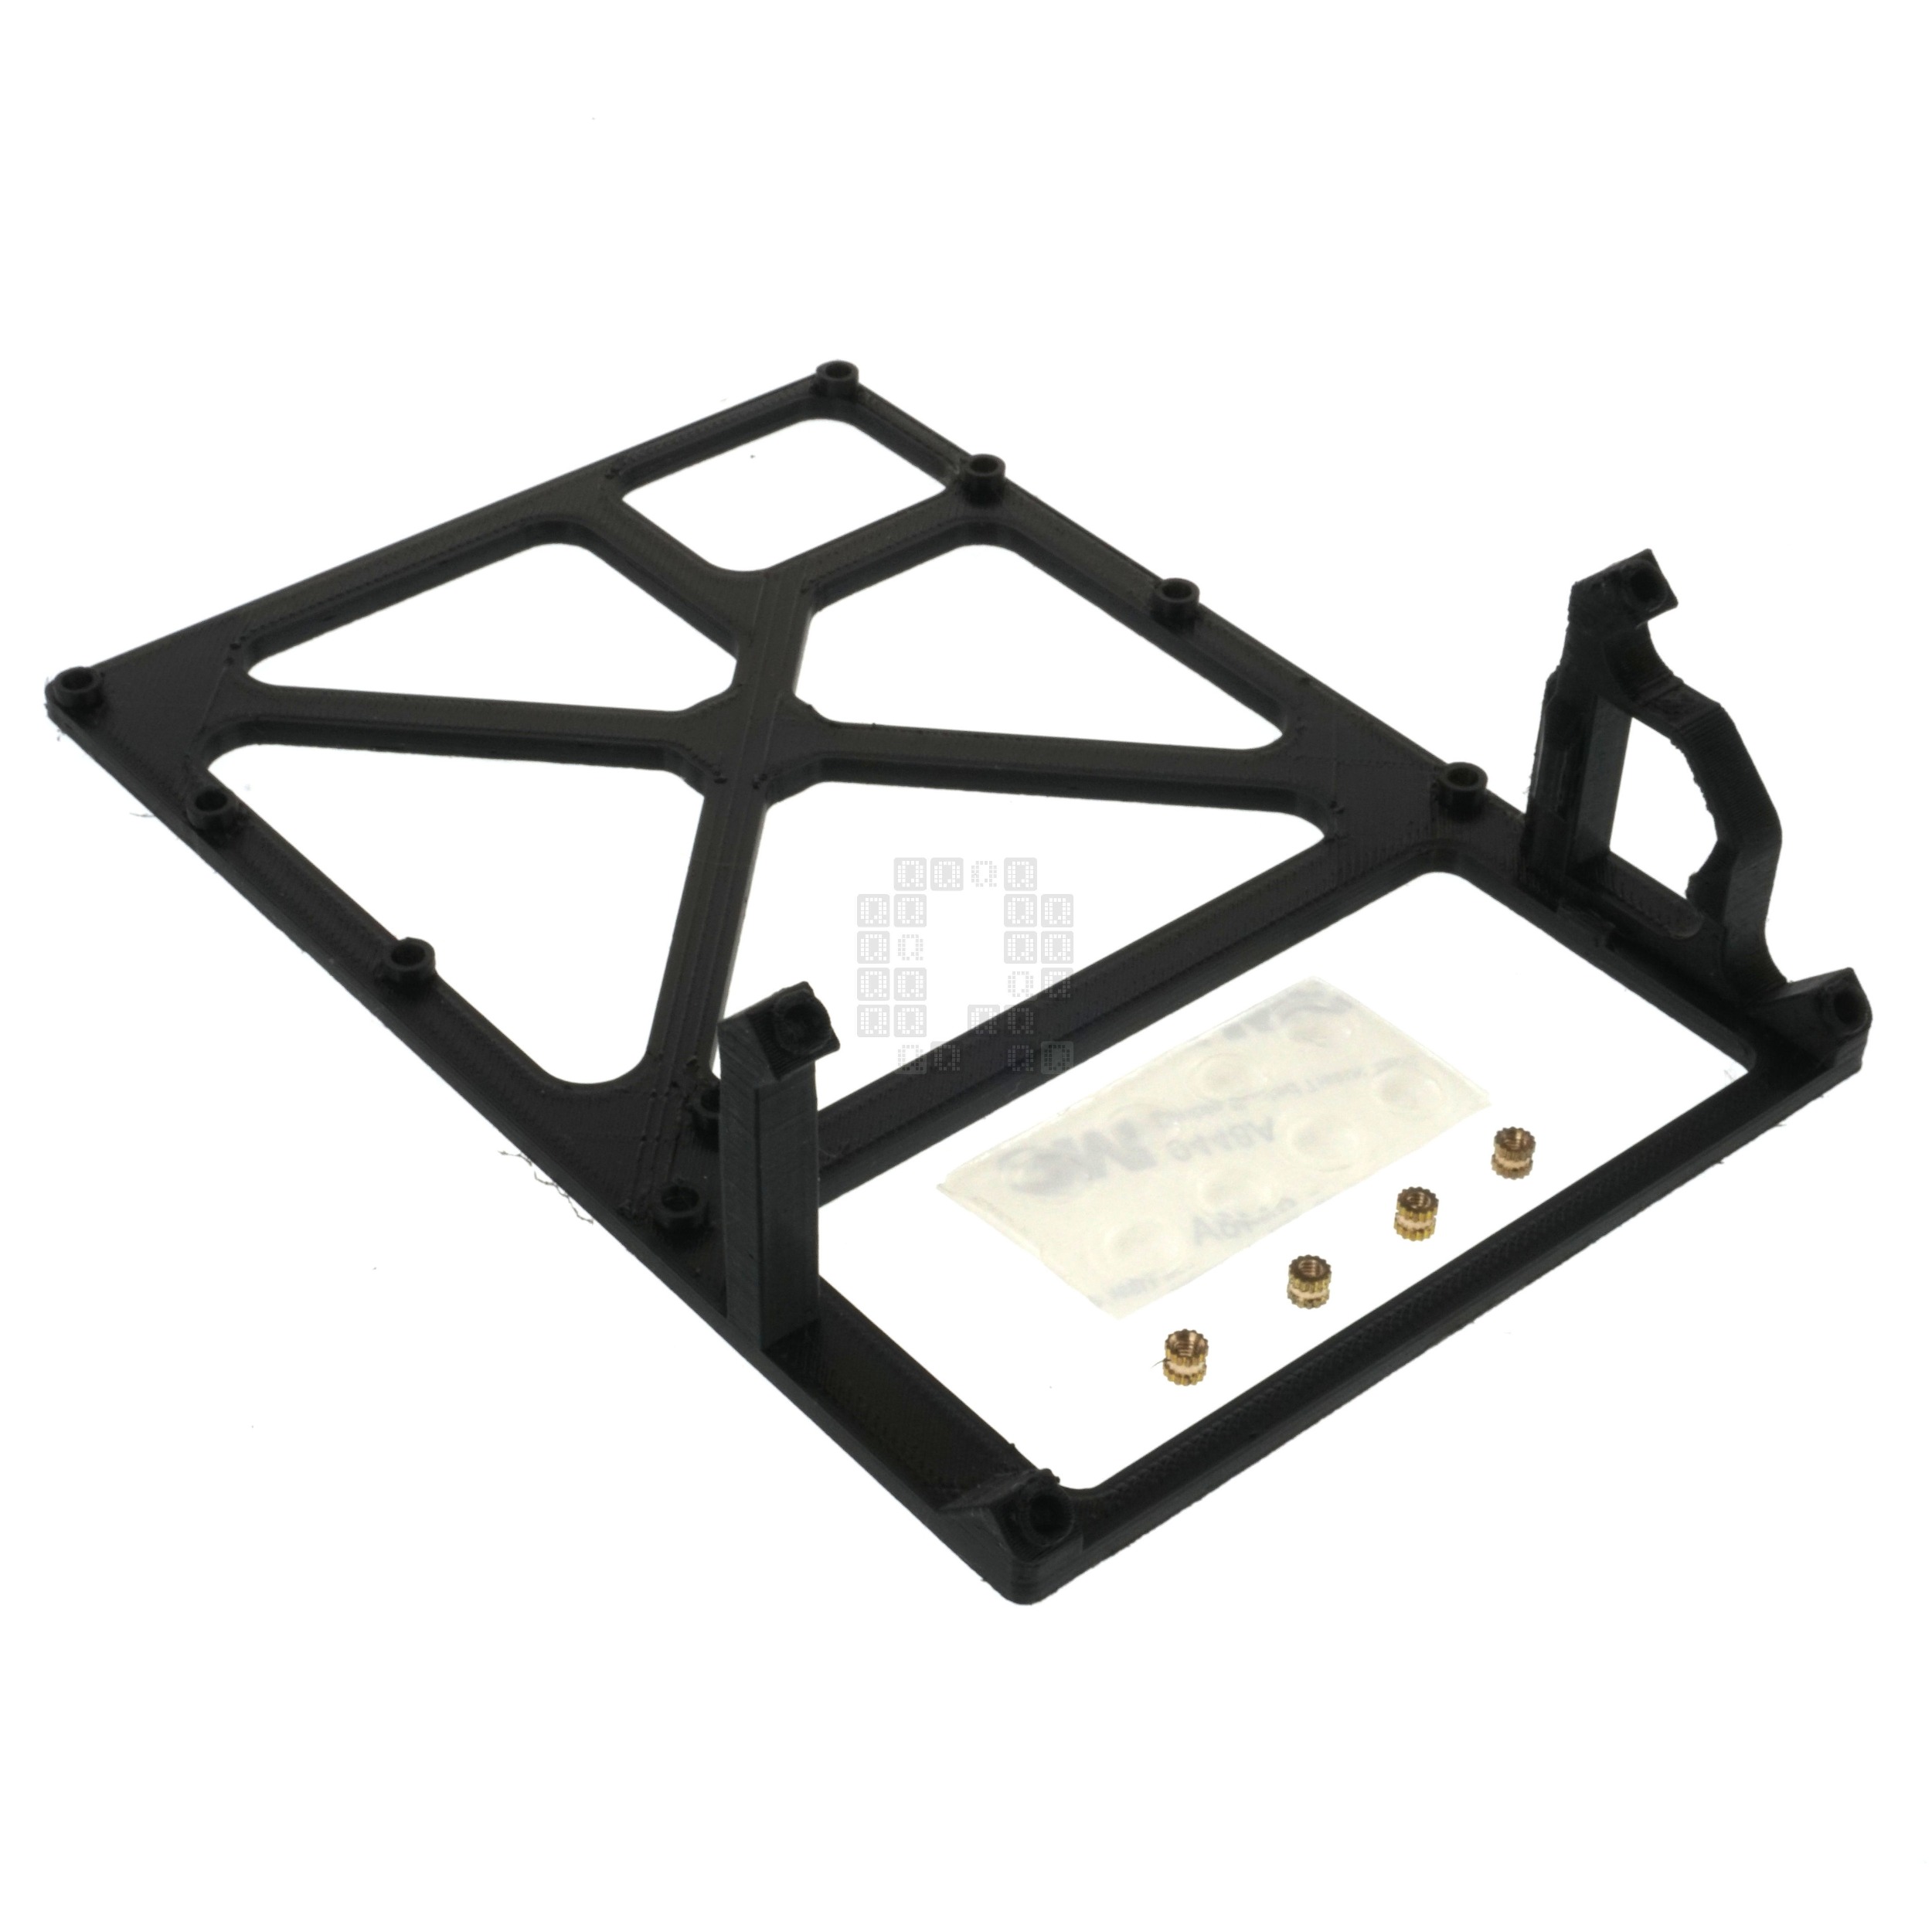 Sanni Open Source Cart Reader HW5 Main PCB Stand Frame w/Battery Access, Black